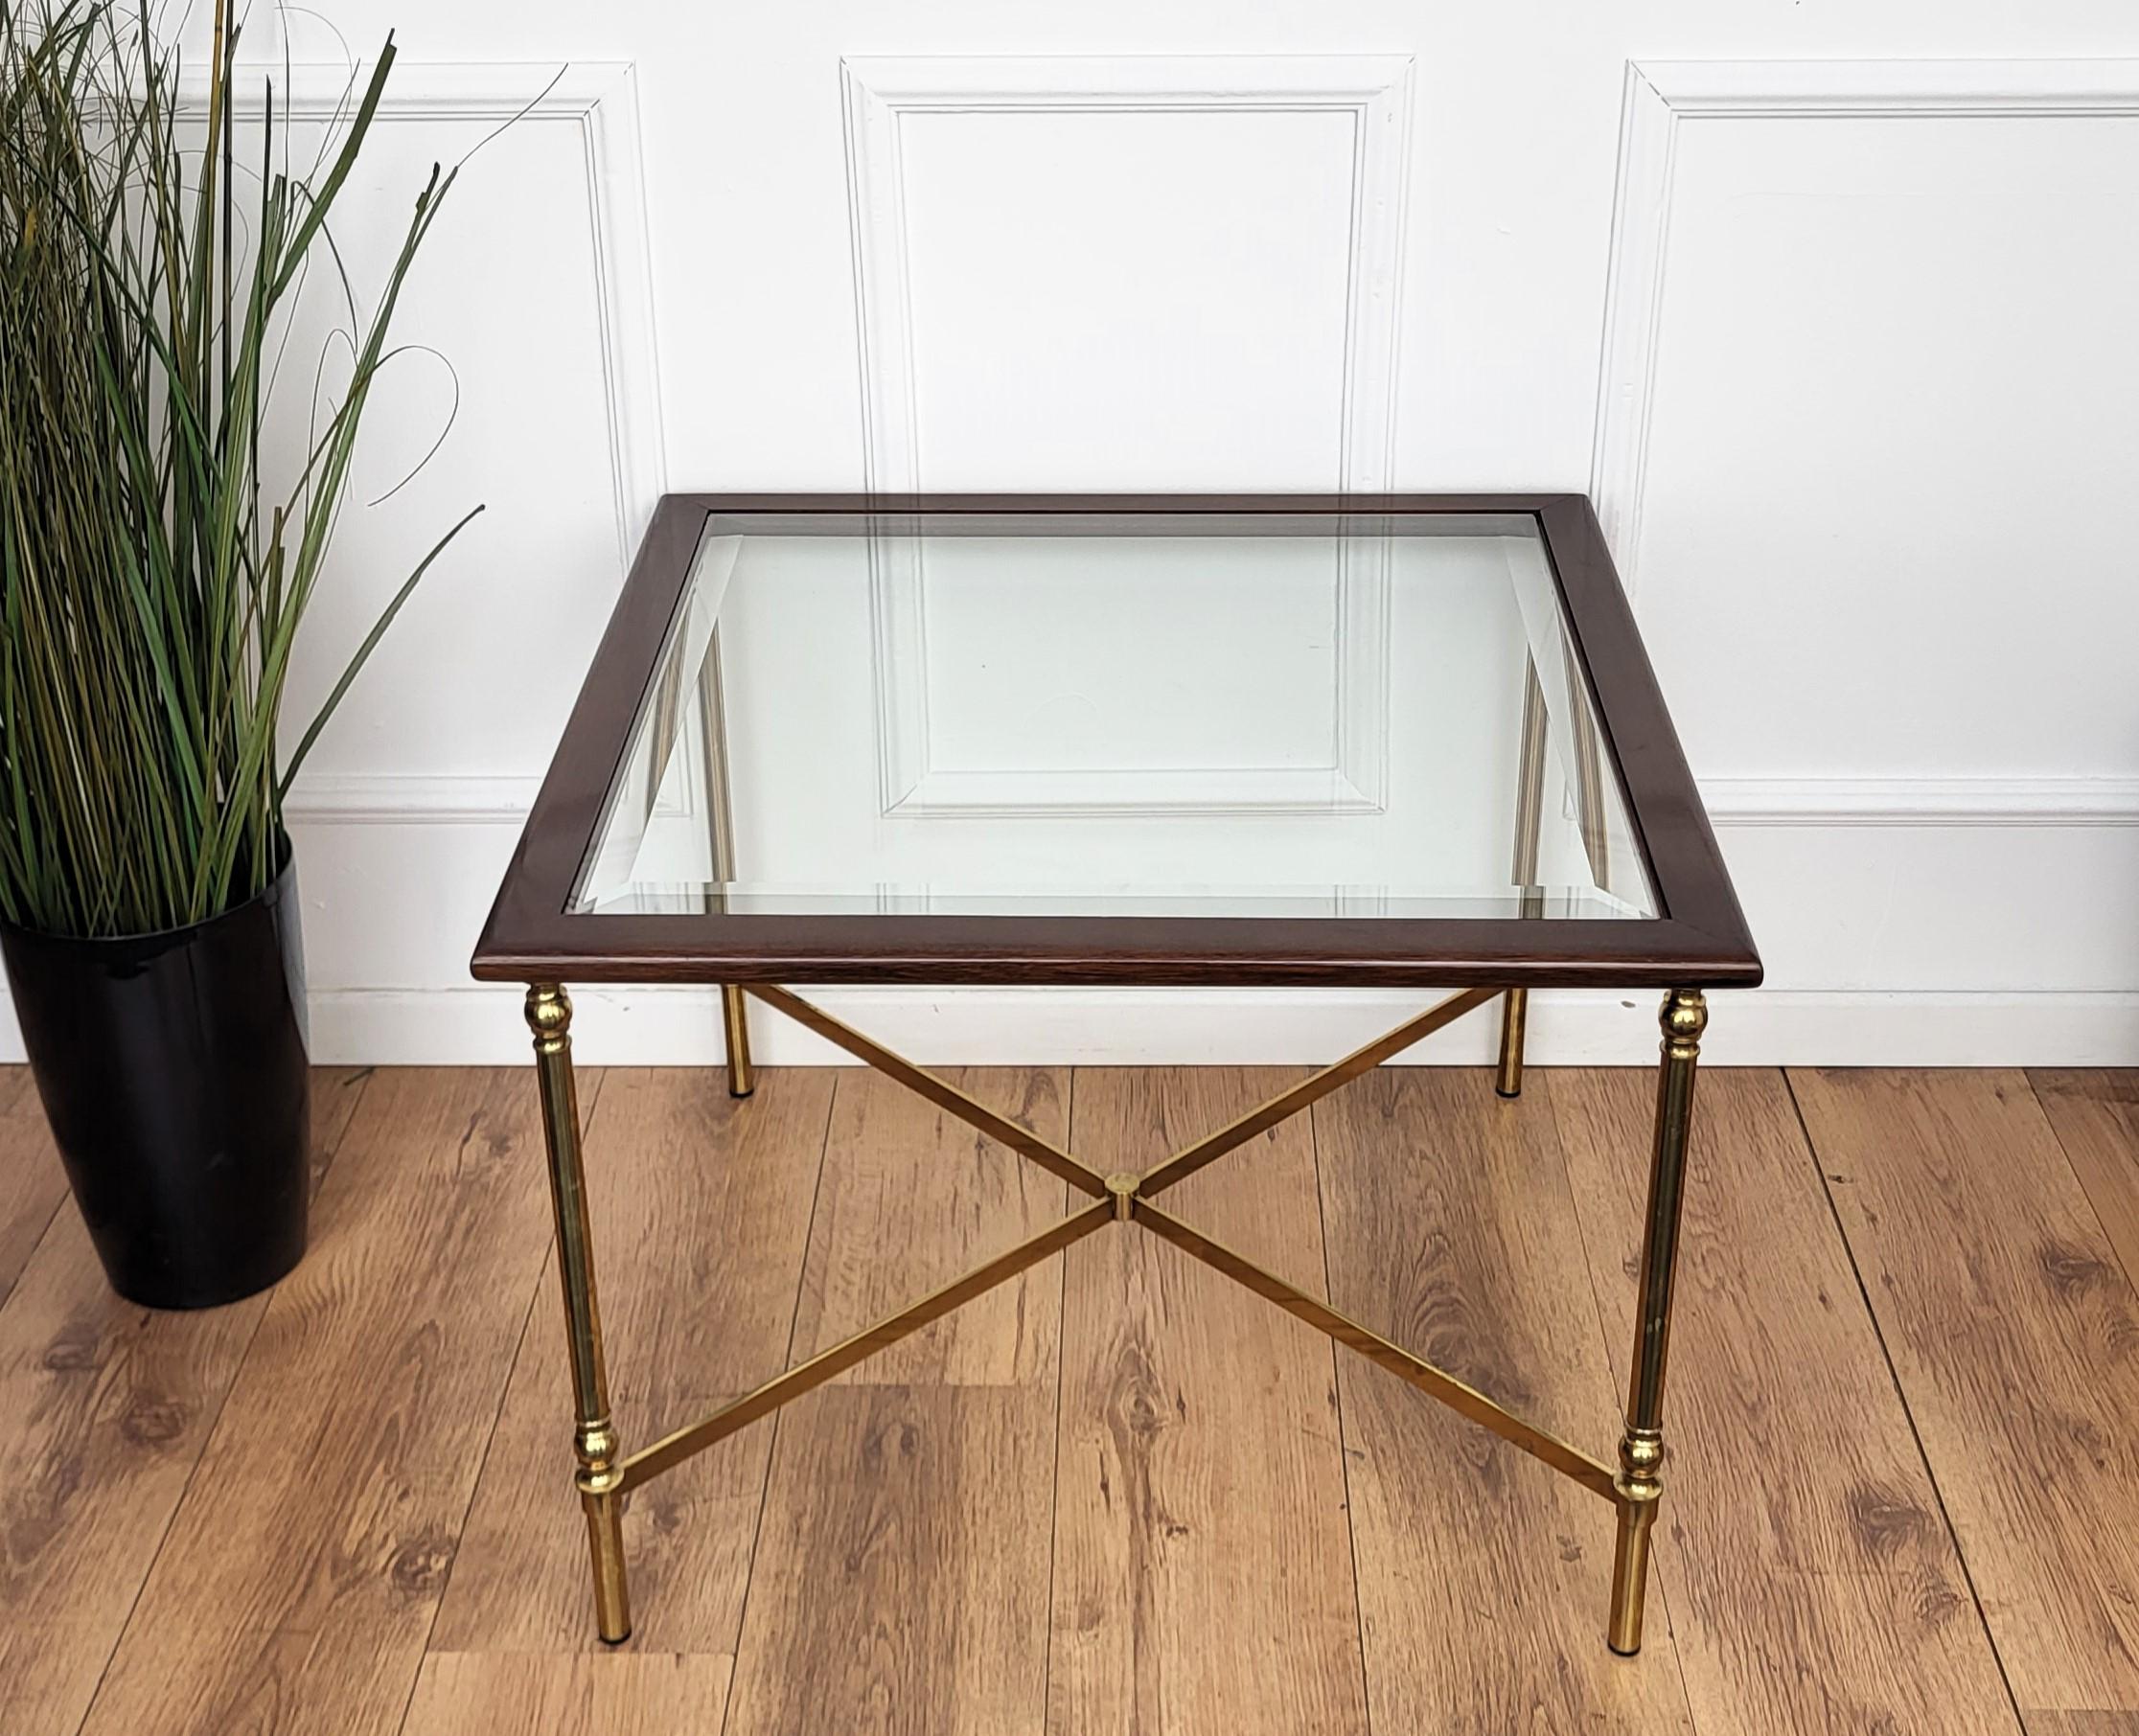 Hollywood Regency 1960s Italian Modern Regency Neoclassical Squared Wood Brass Glass Coffee Table For Sale